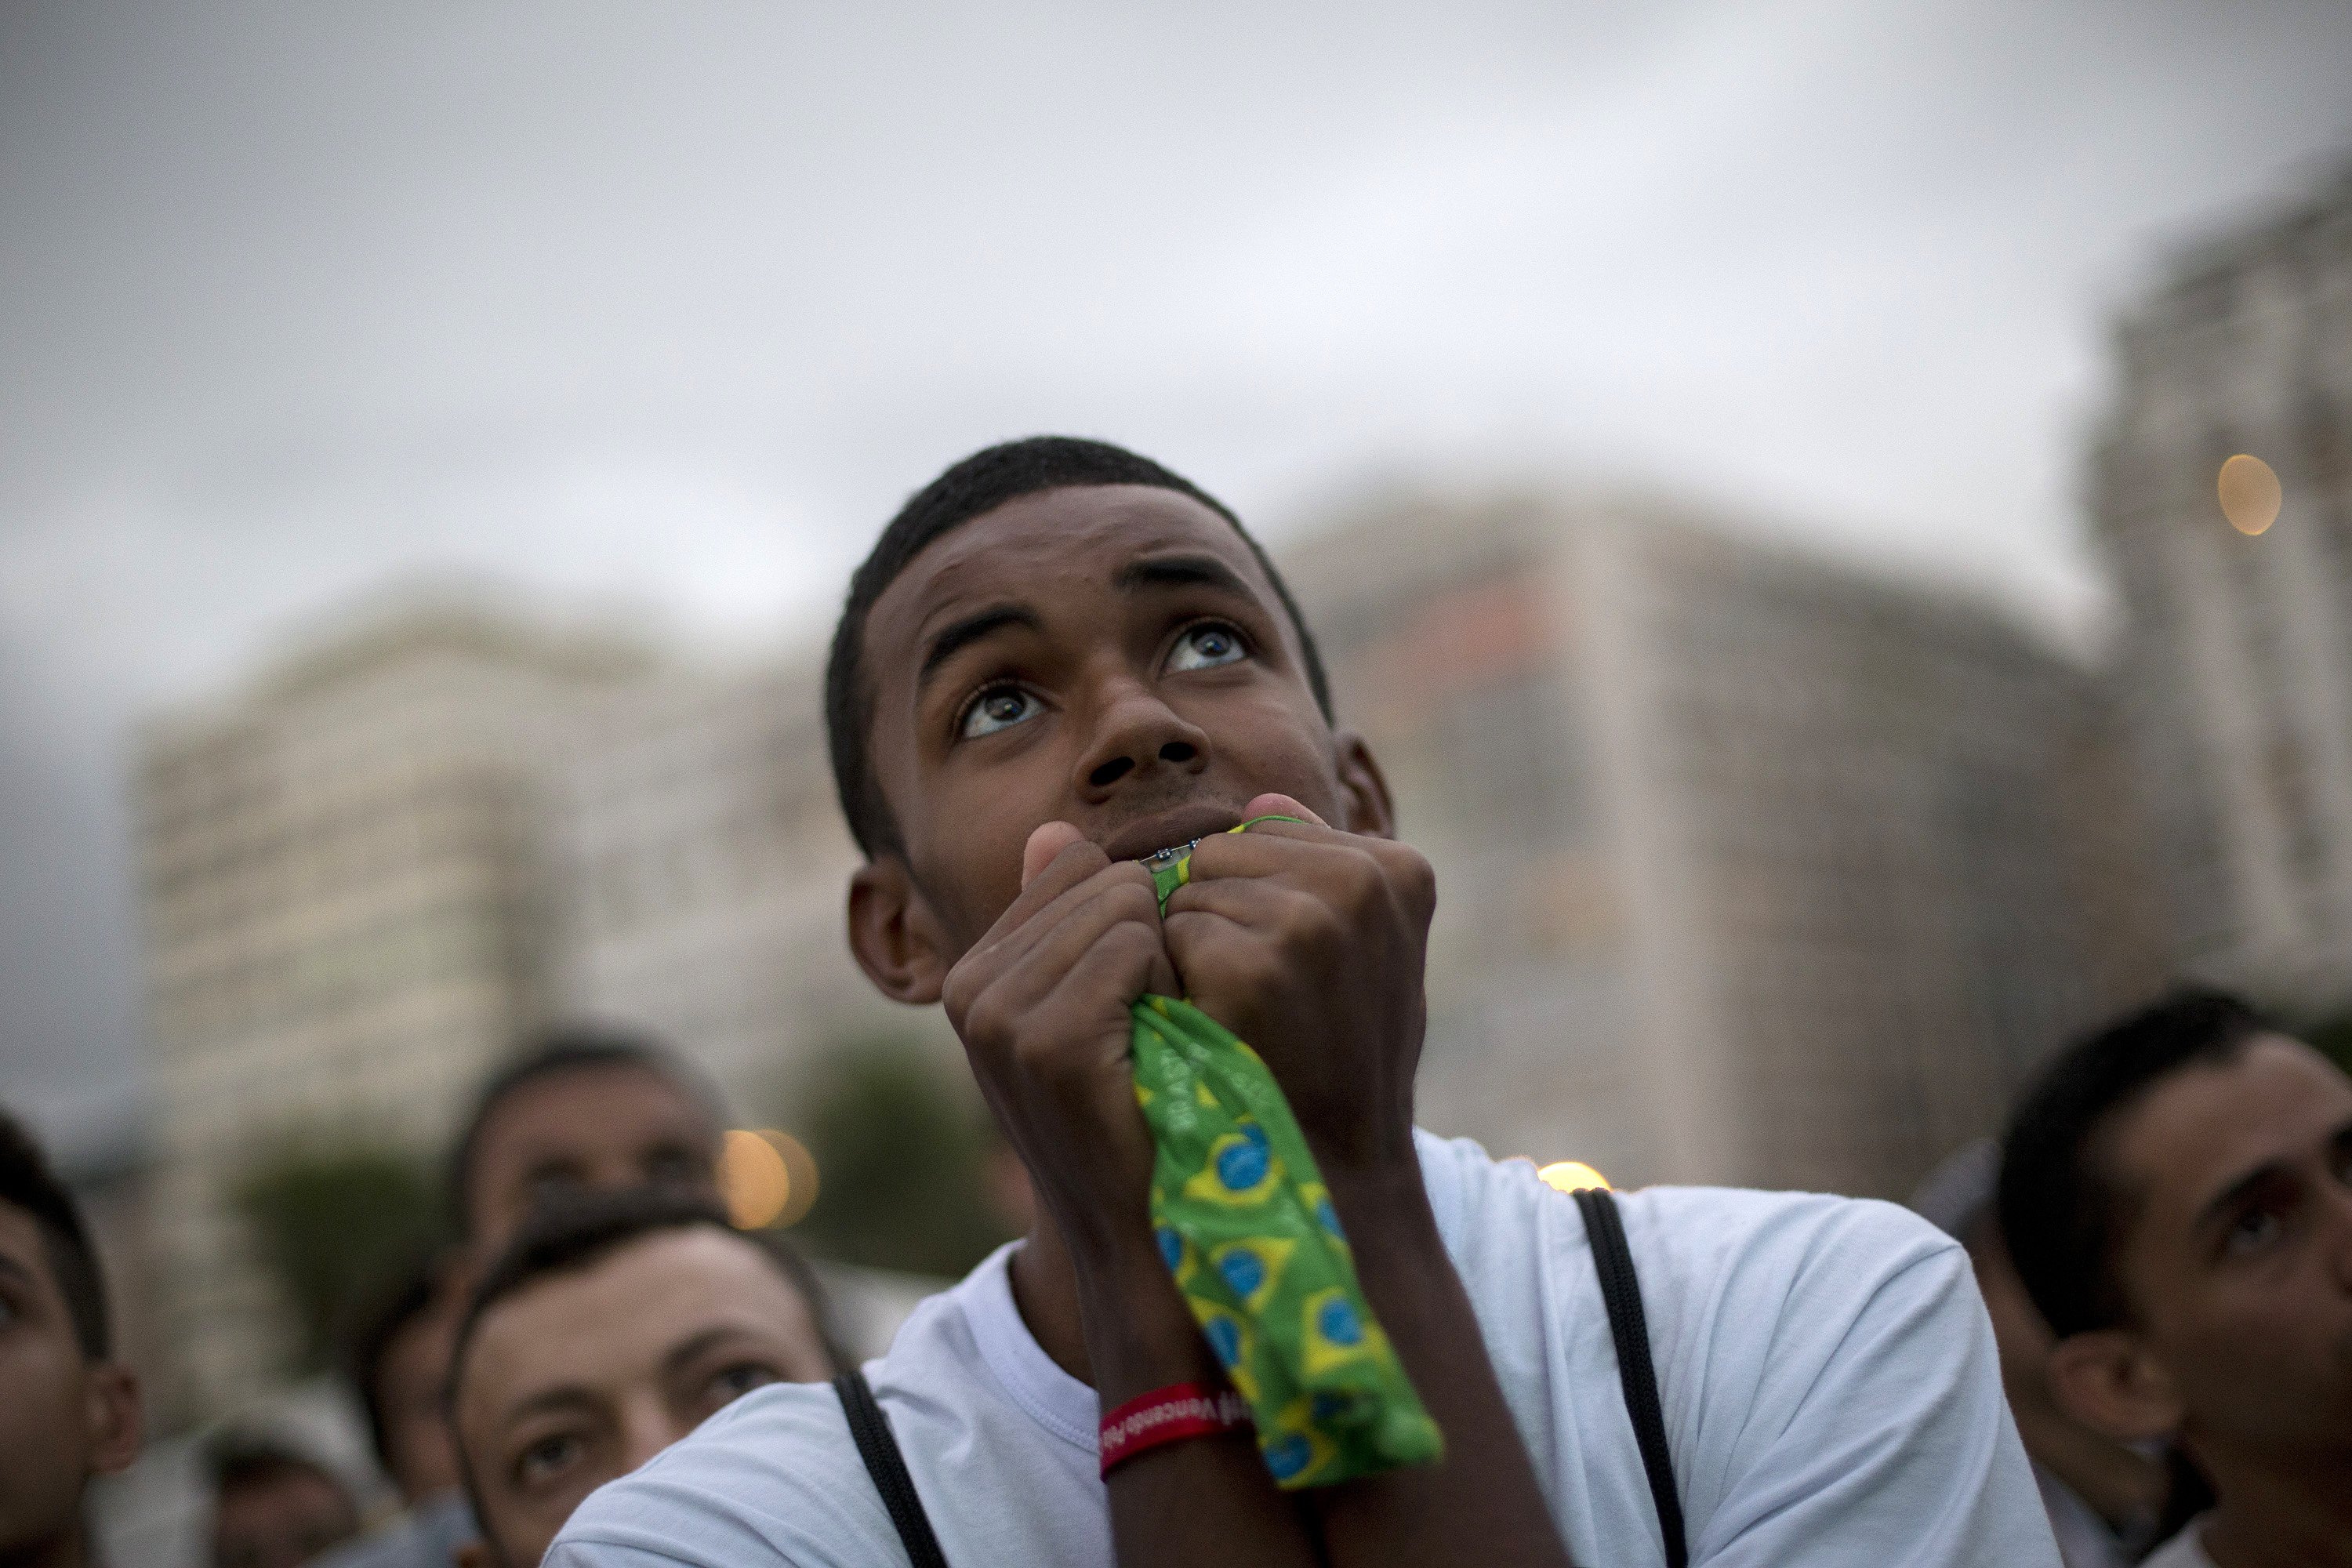 A Brazil soccer fan watches a screen broadcasting the World Cup opening match between Brazil and Croatia inside the FIFA Fan Fest area on Copacabana beach in Rio de Janeiro on June 12, 2014.